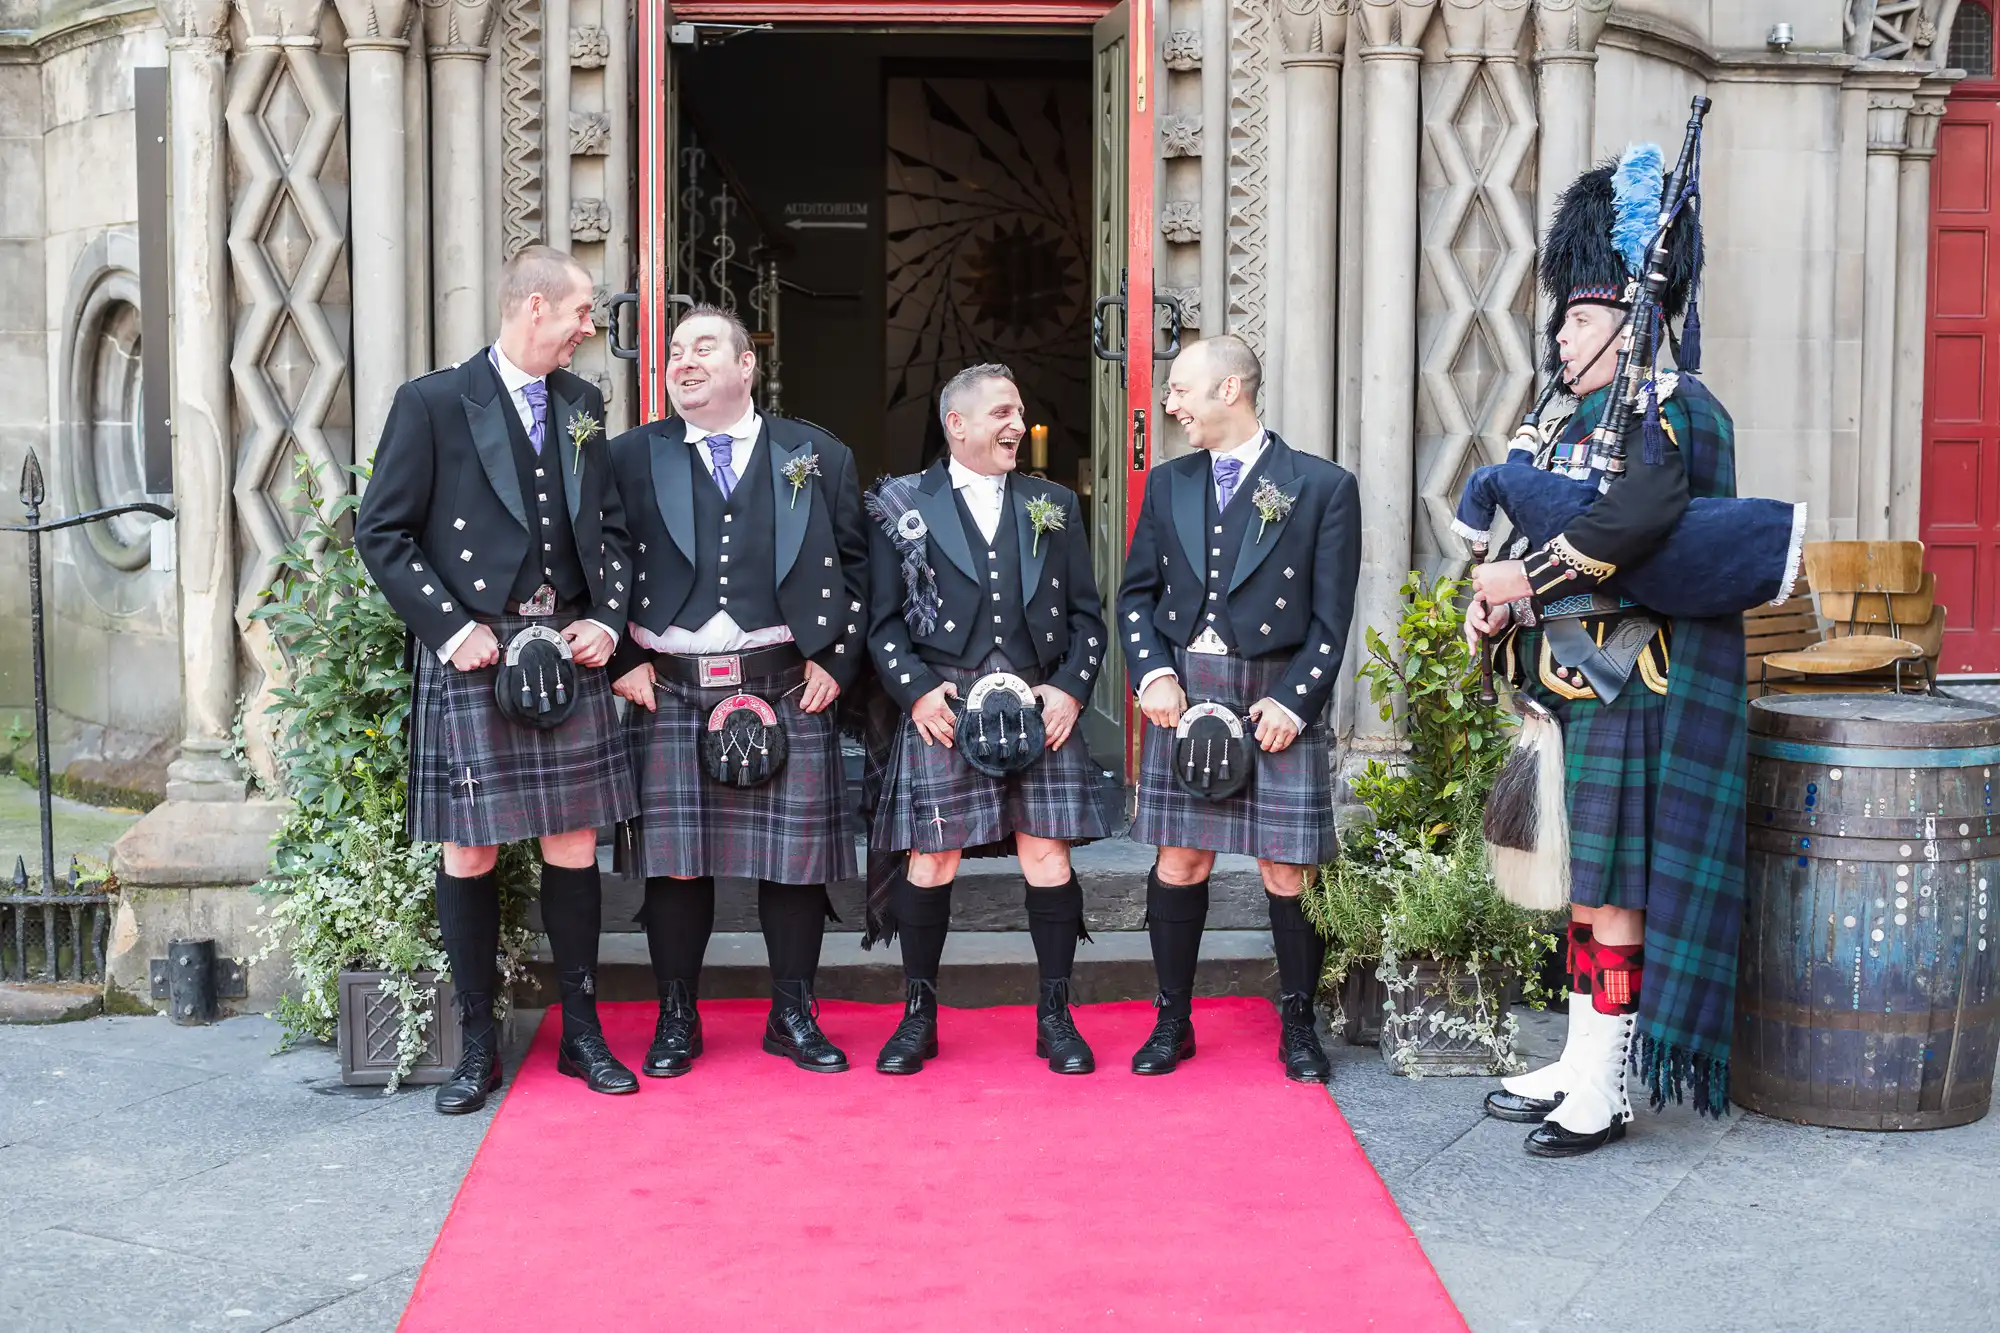 Four men in traditional scottish kilts laugh together outside a building, while a piper in full highland dress plays nearby.